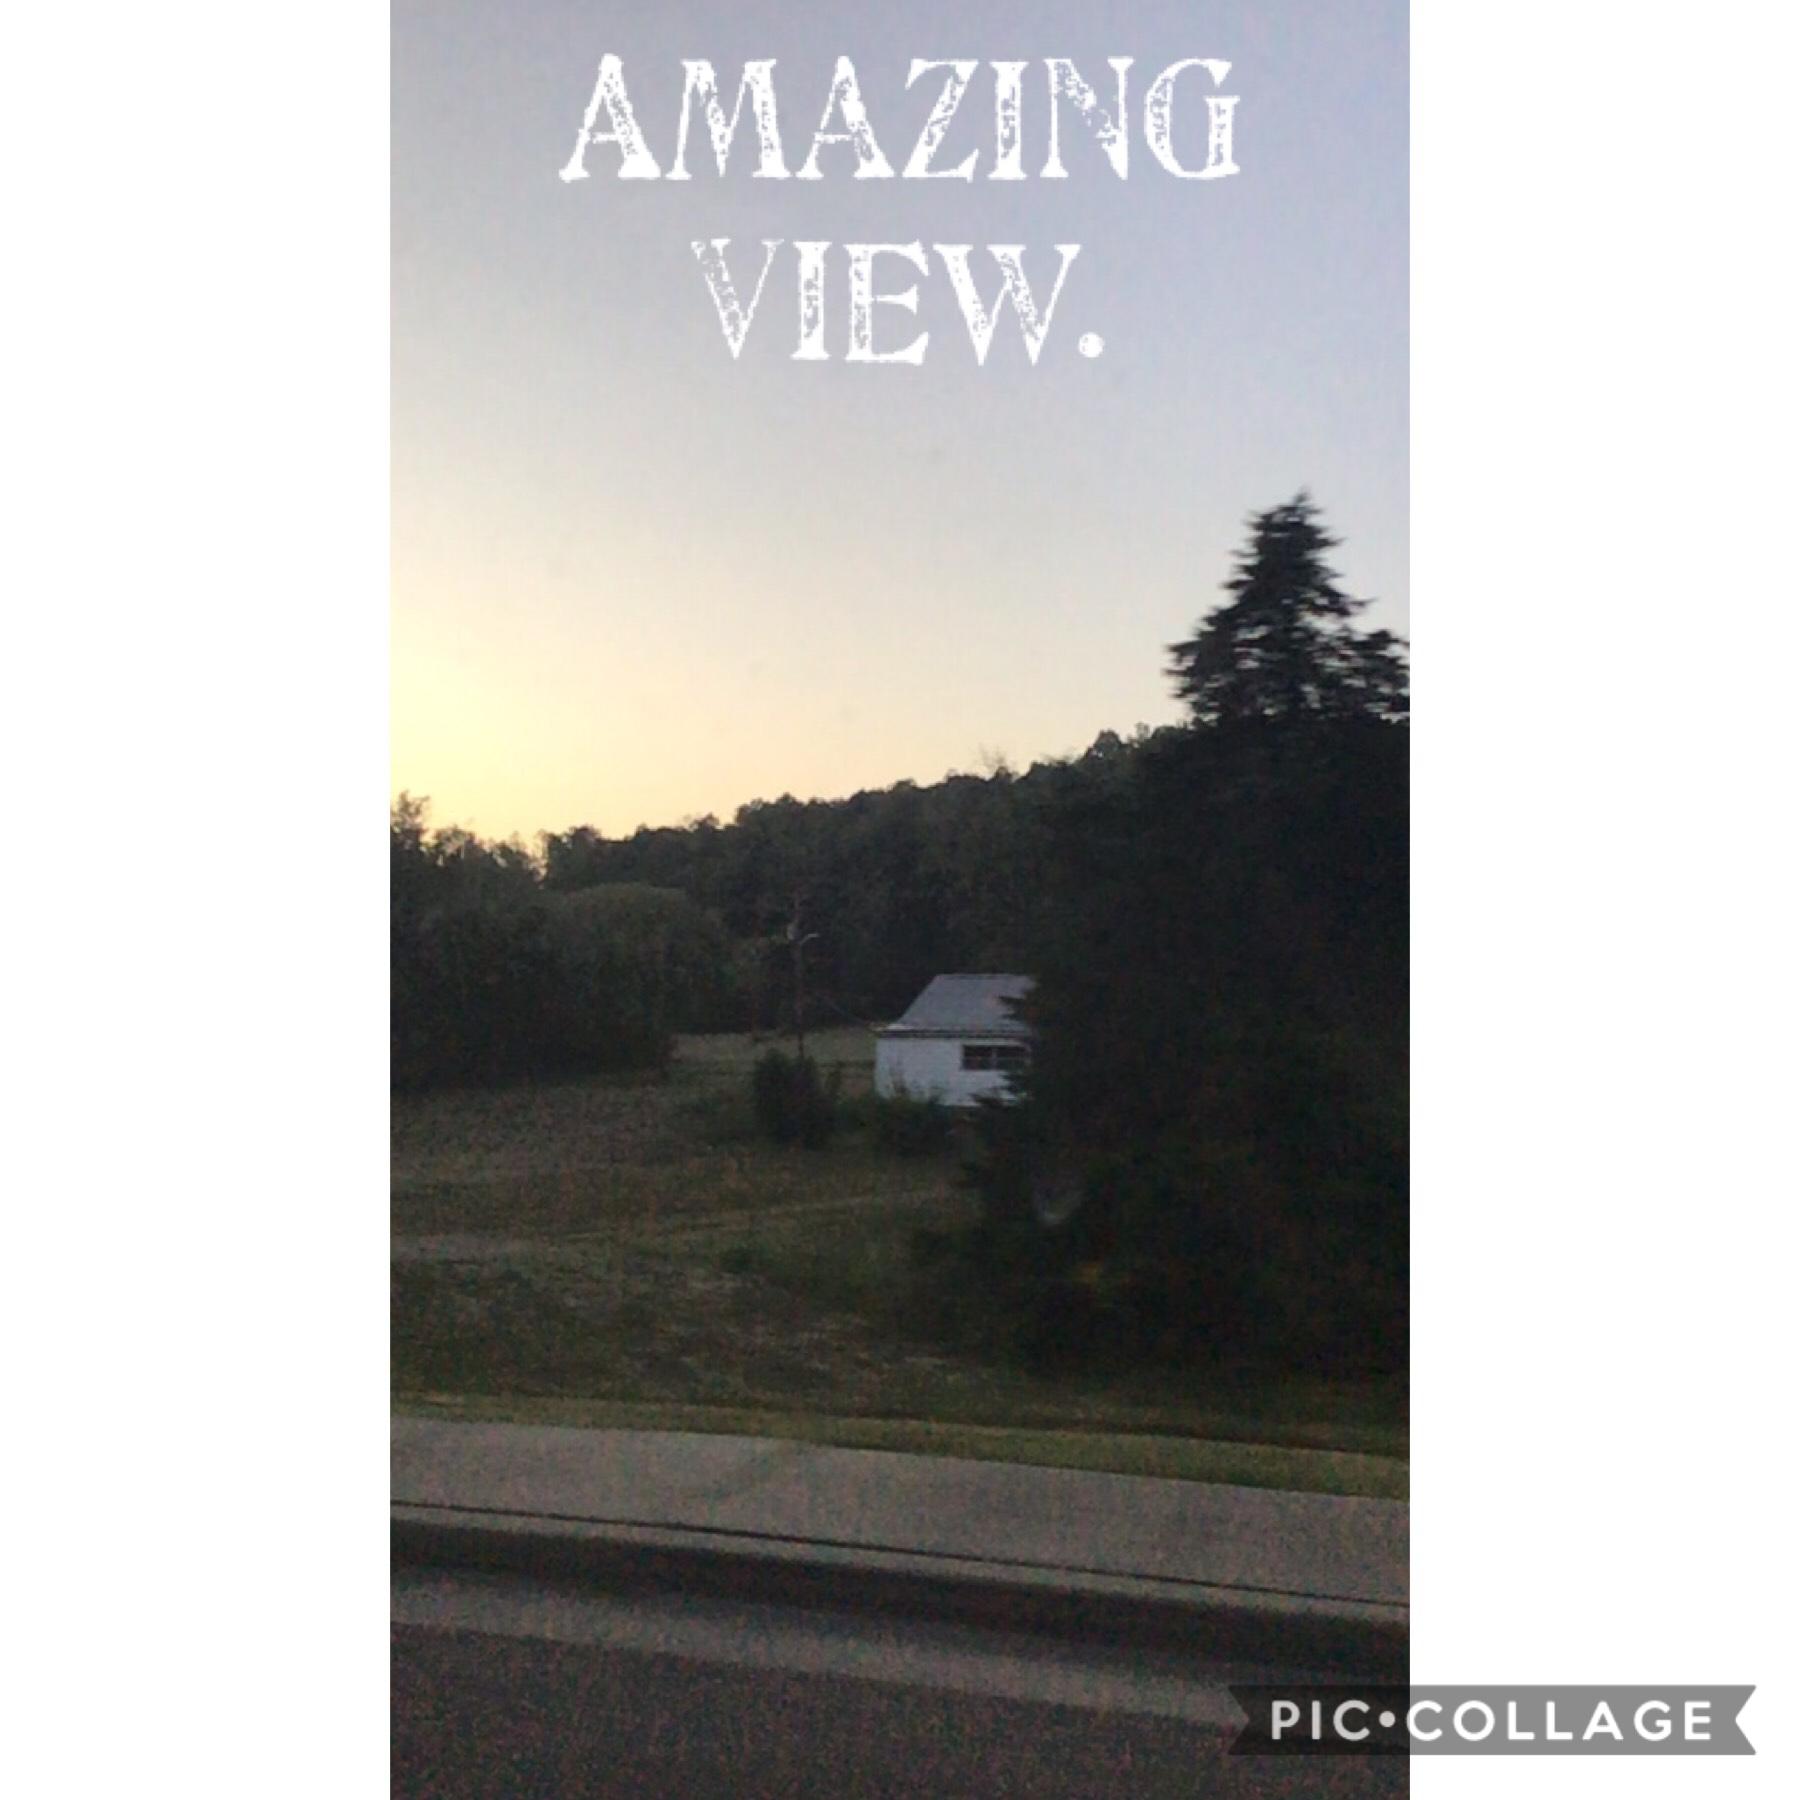 This was taken in my mom’s car out the window. It WAS a slo-mo video, but unfortunately, PicCollage said I could only use it as a still image. I still think it’s very pretty. Feel free to check out my YouTube channel, PrankGamer. Just saying, you don’t ha